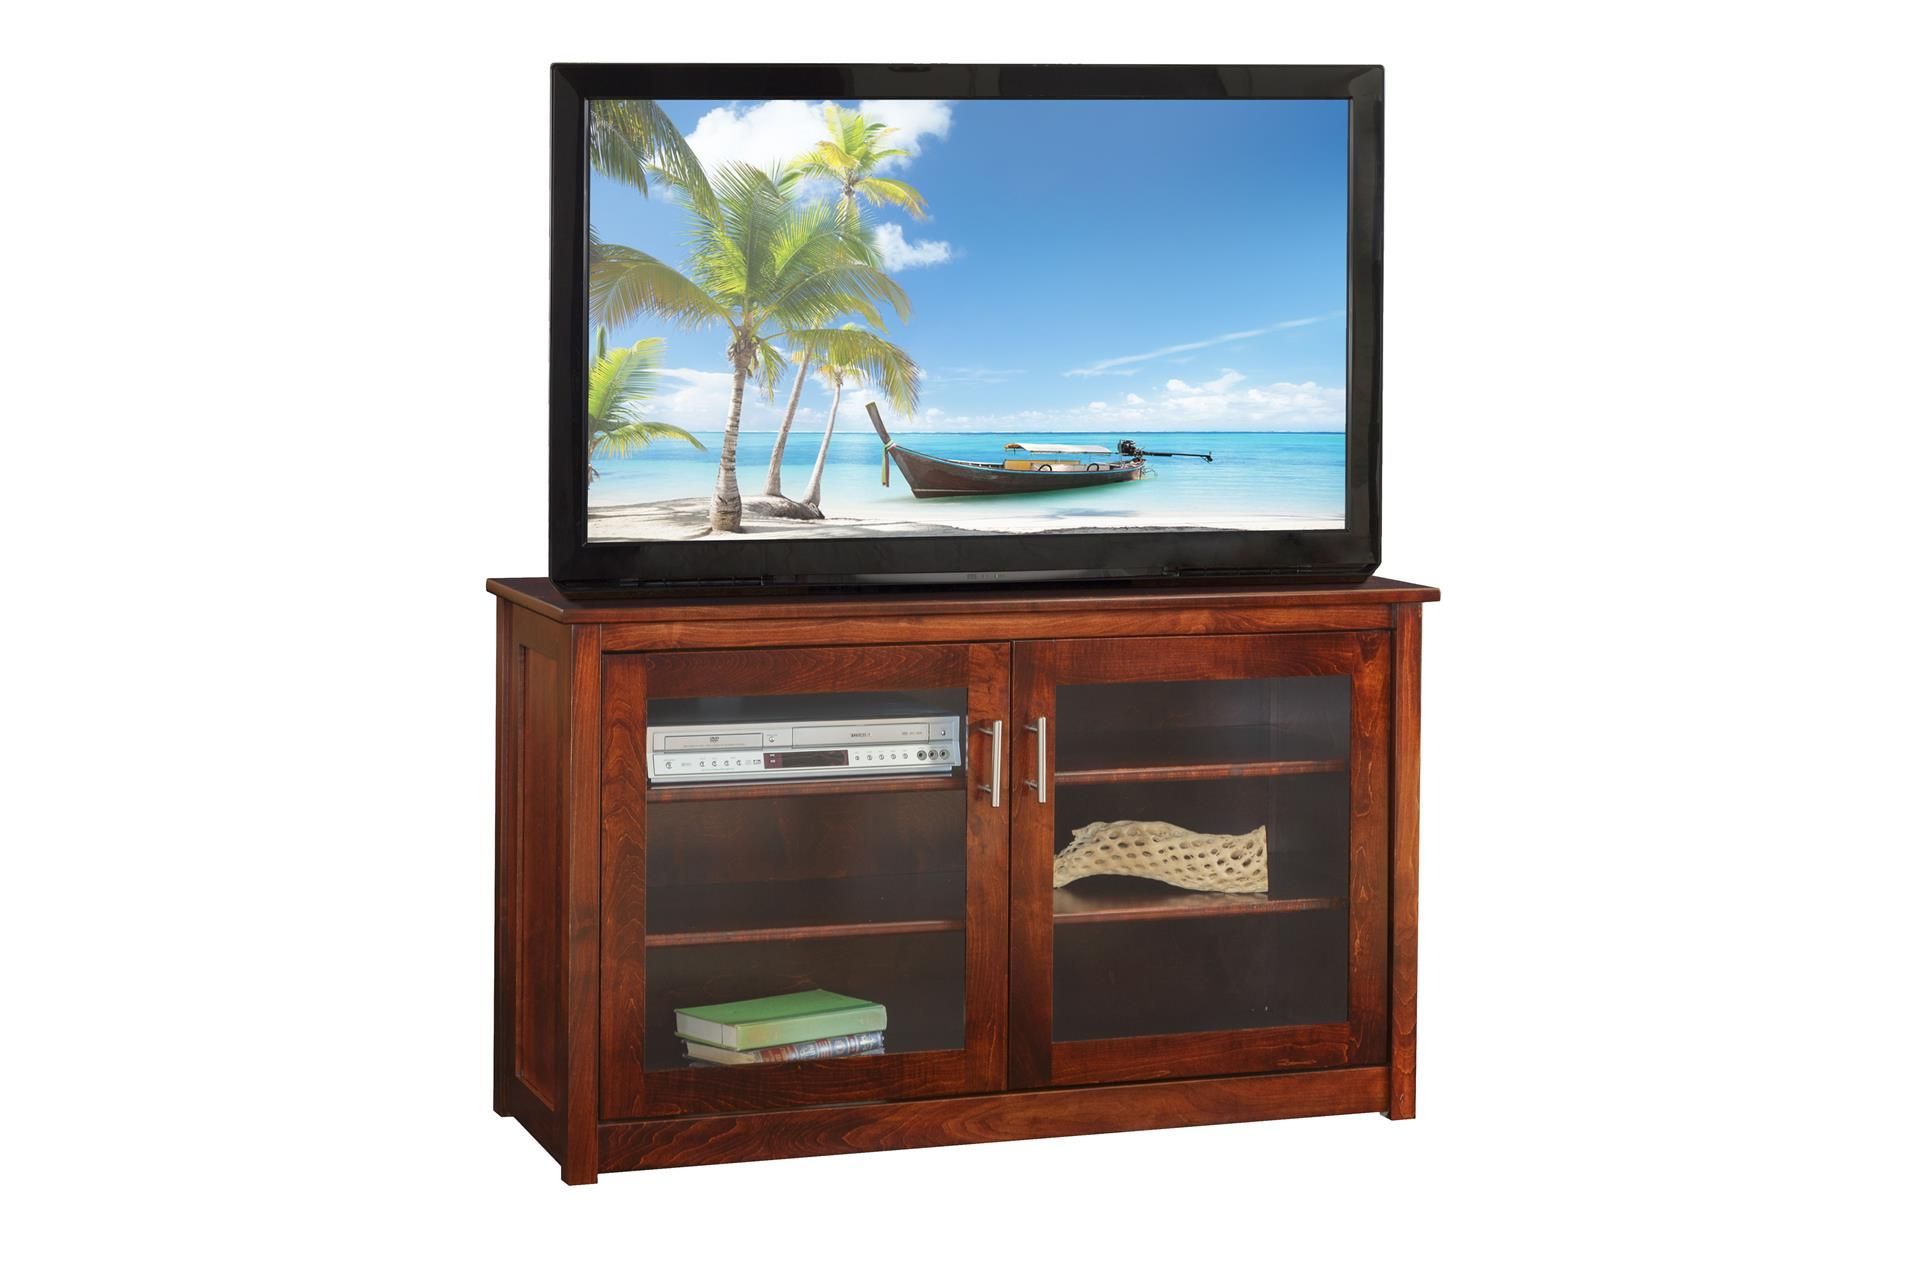 Amish 48" Lcd Tv Stand | Lcd Tv Stand, Fireplace Tv Stand Inside Hard Wood Tv Stands (View 3 of 15)